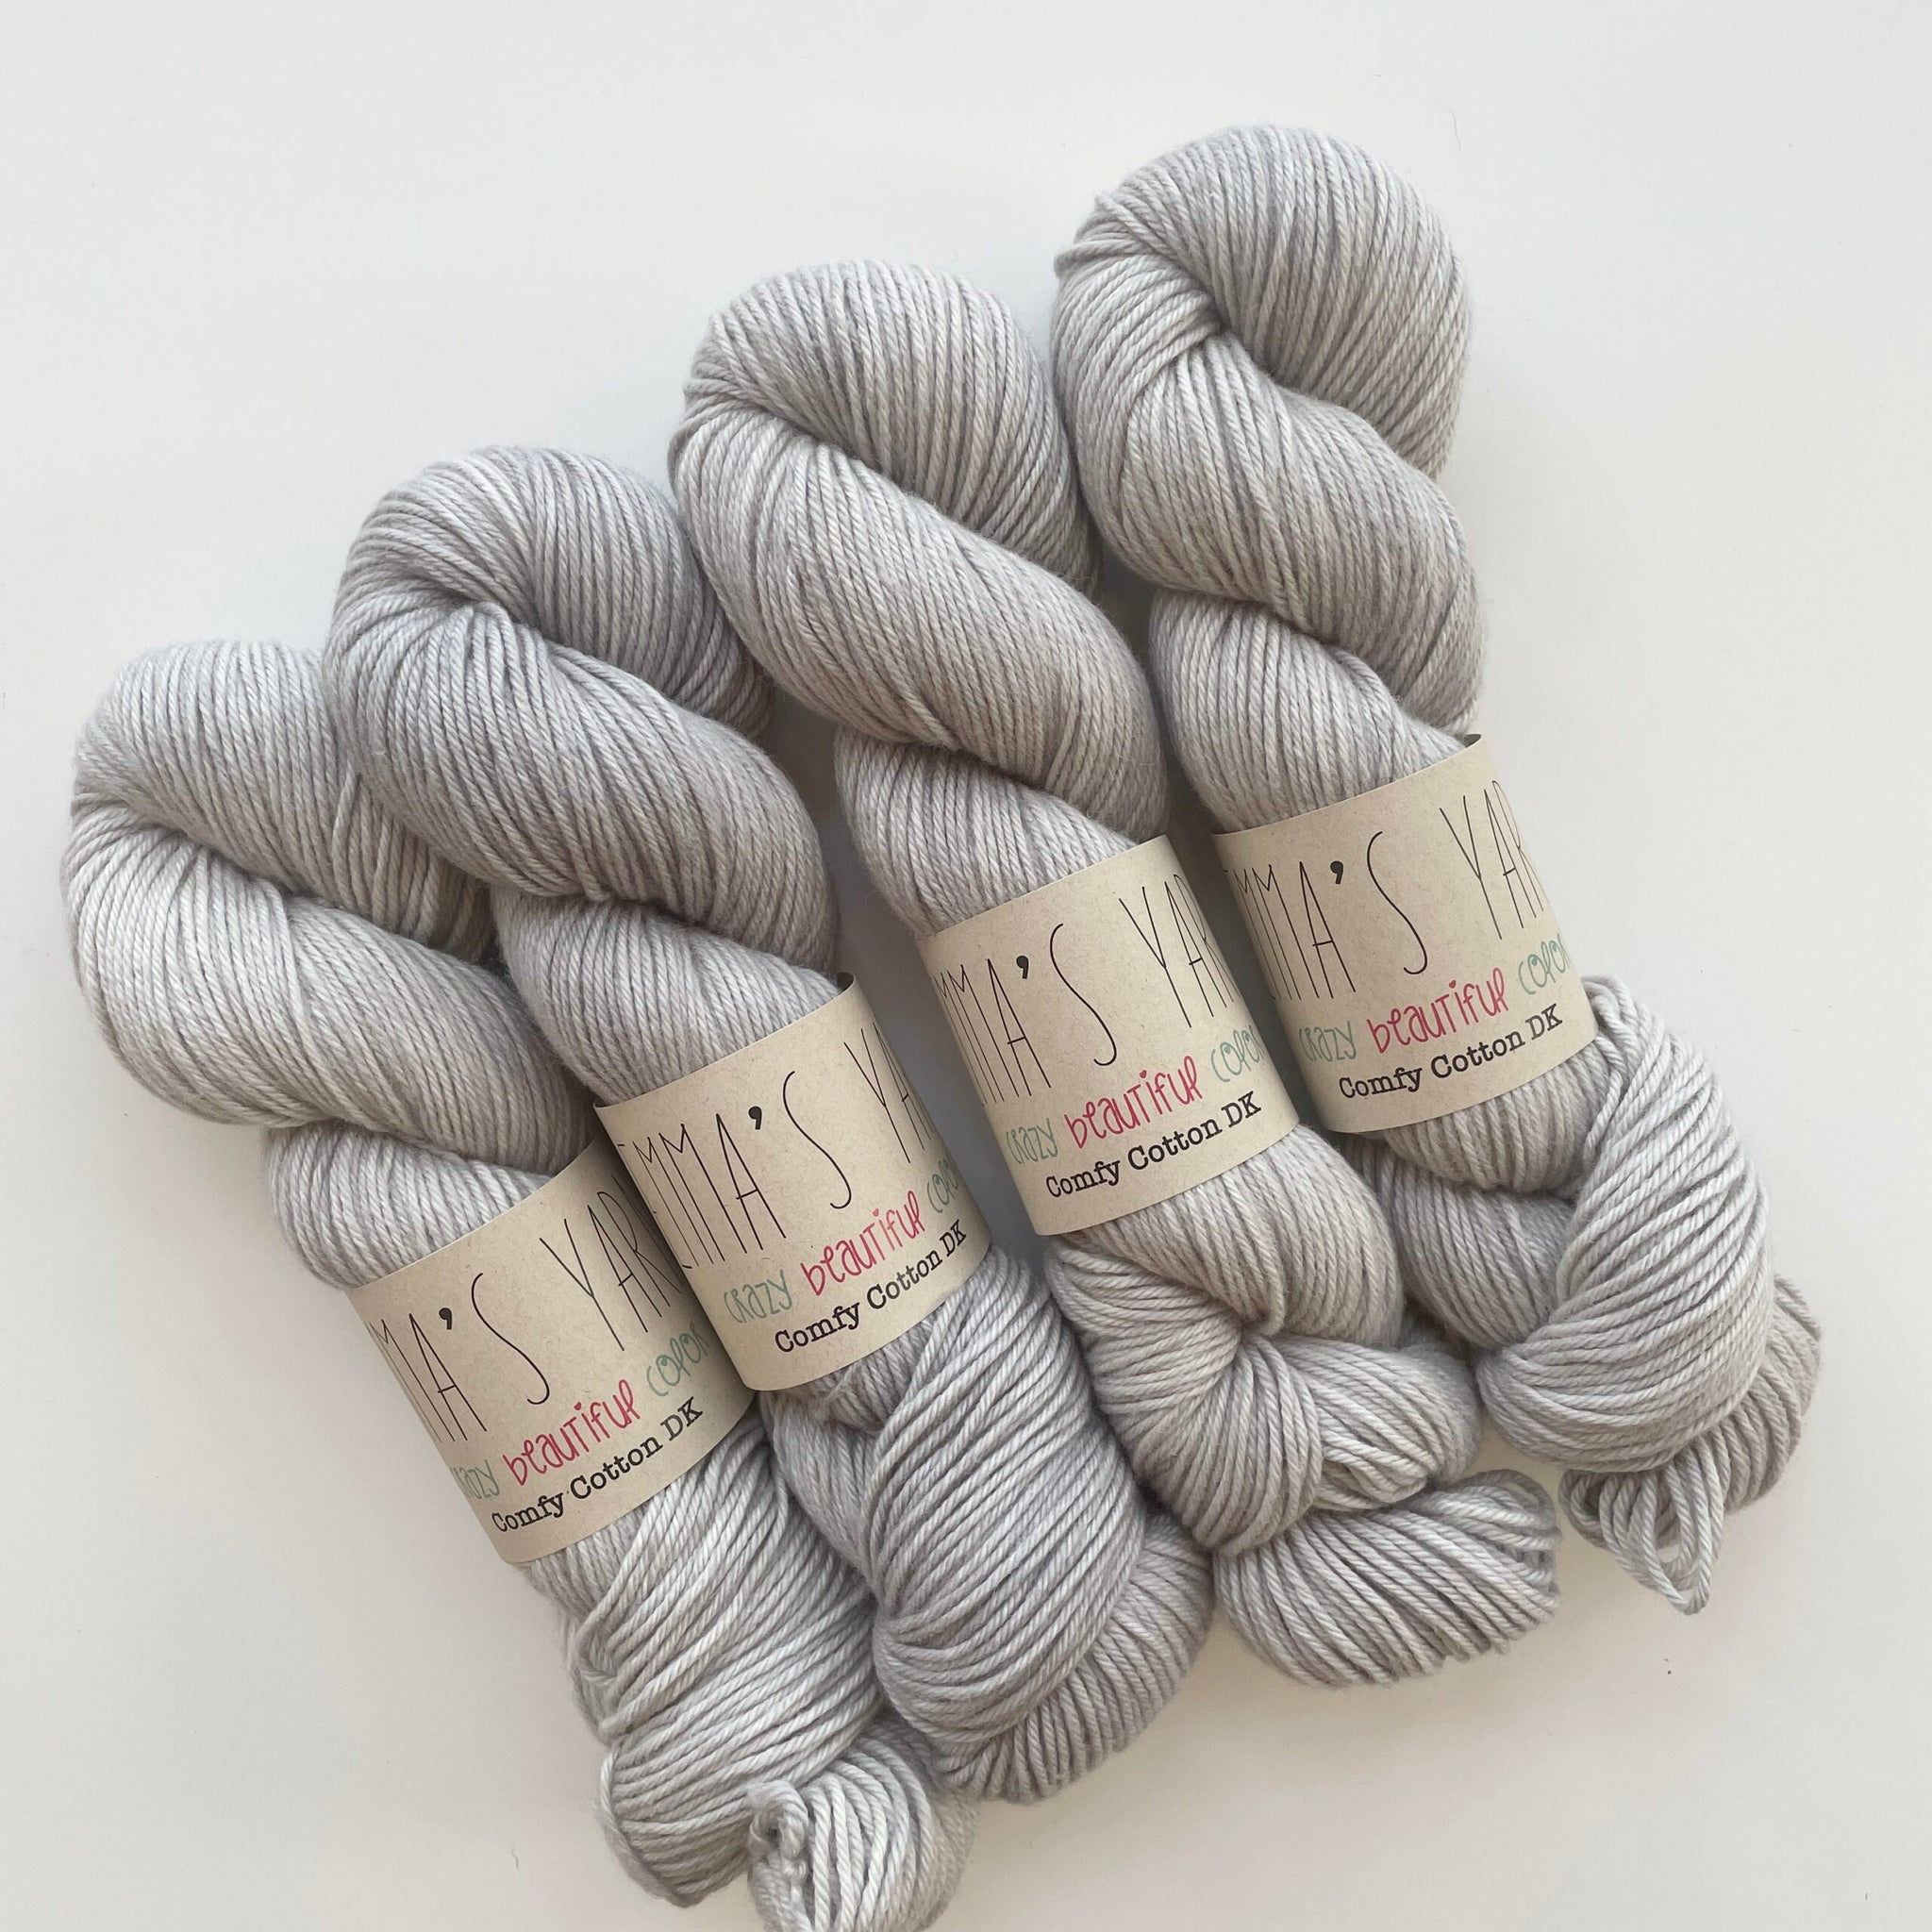 Silver Lining - Comfy Cotton DK (6)